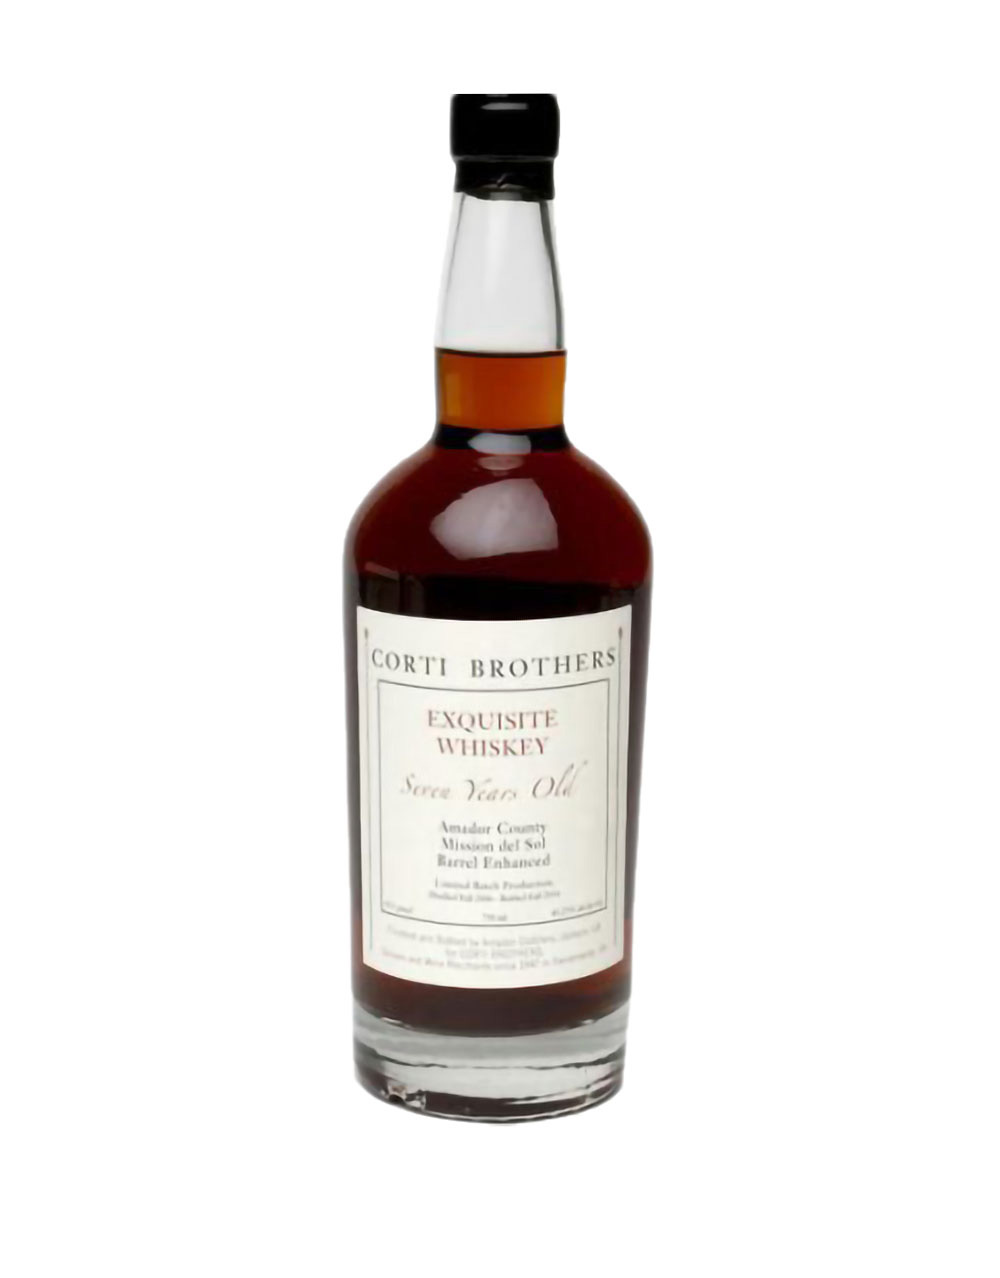 Hochstadter's Slow & Low Rock and Rye 8 Year Old Straight Rye Whiskey